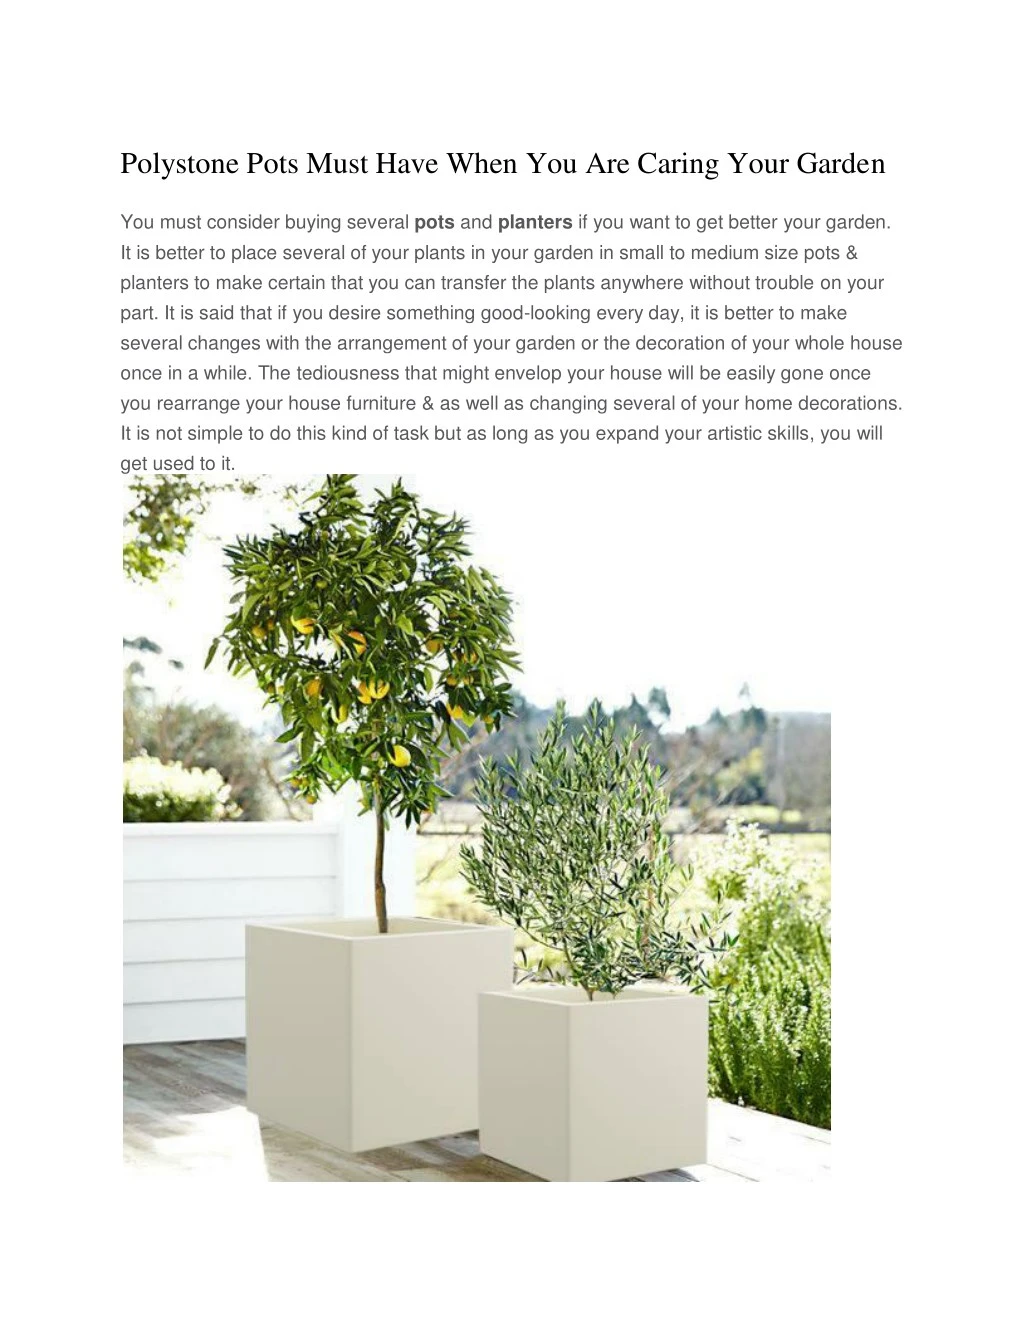 polystone pots must have when you are caring your